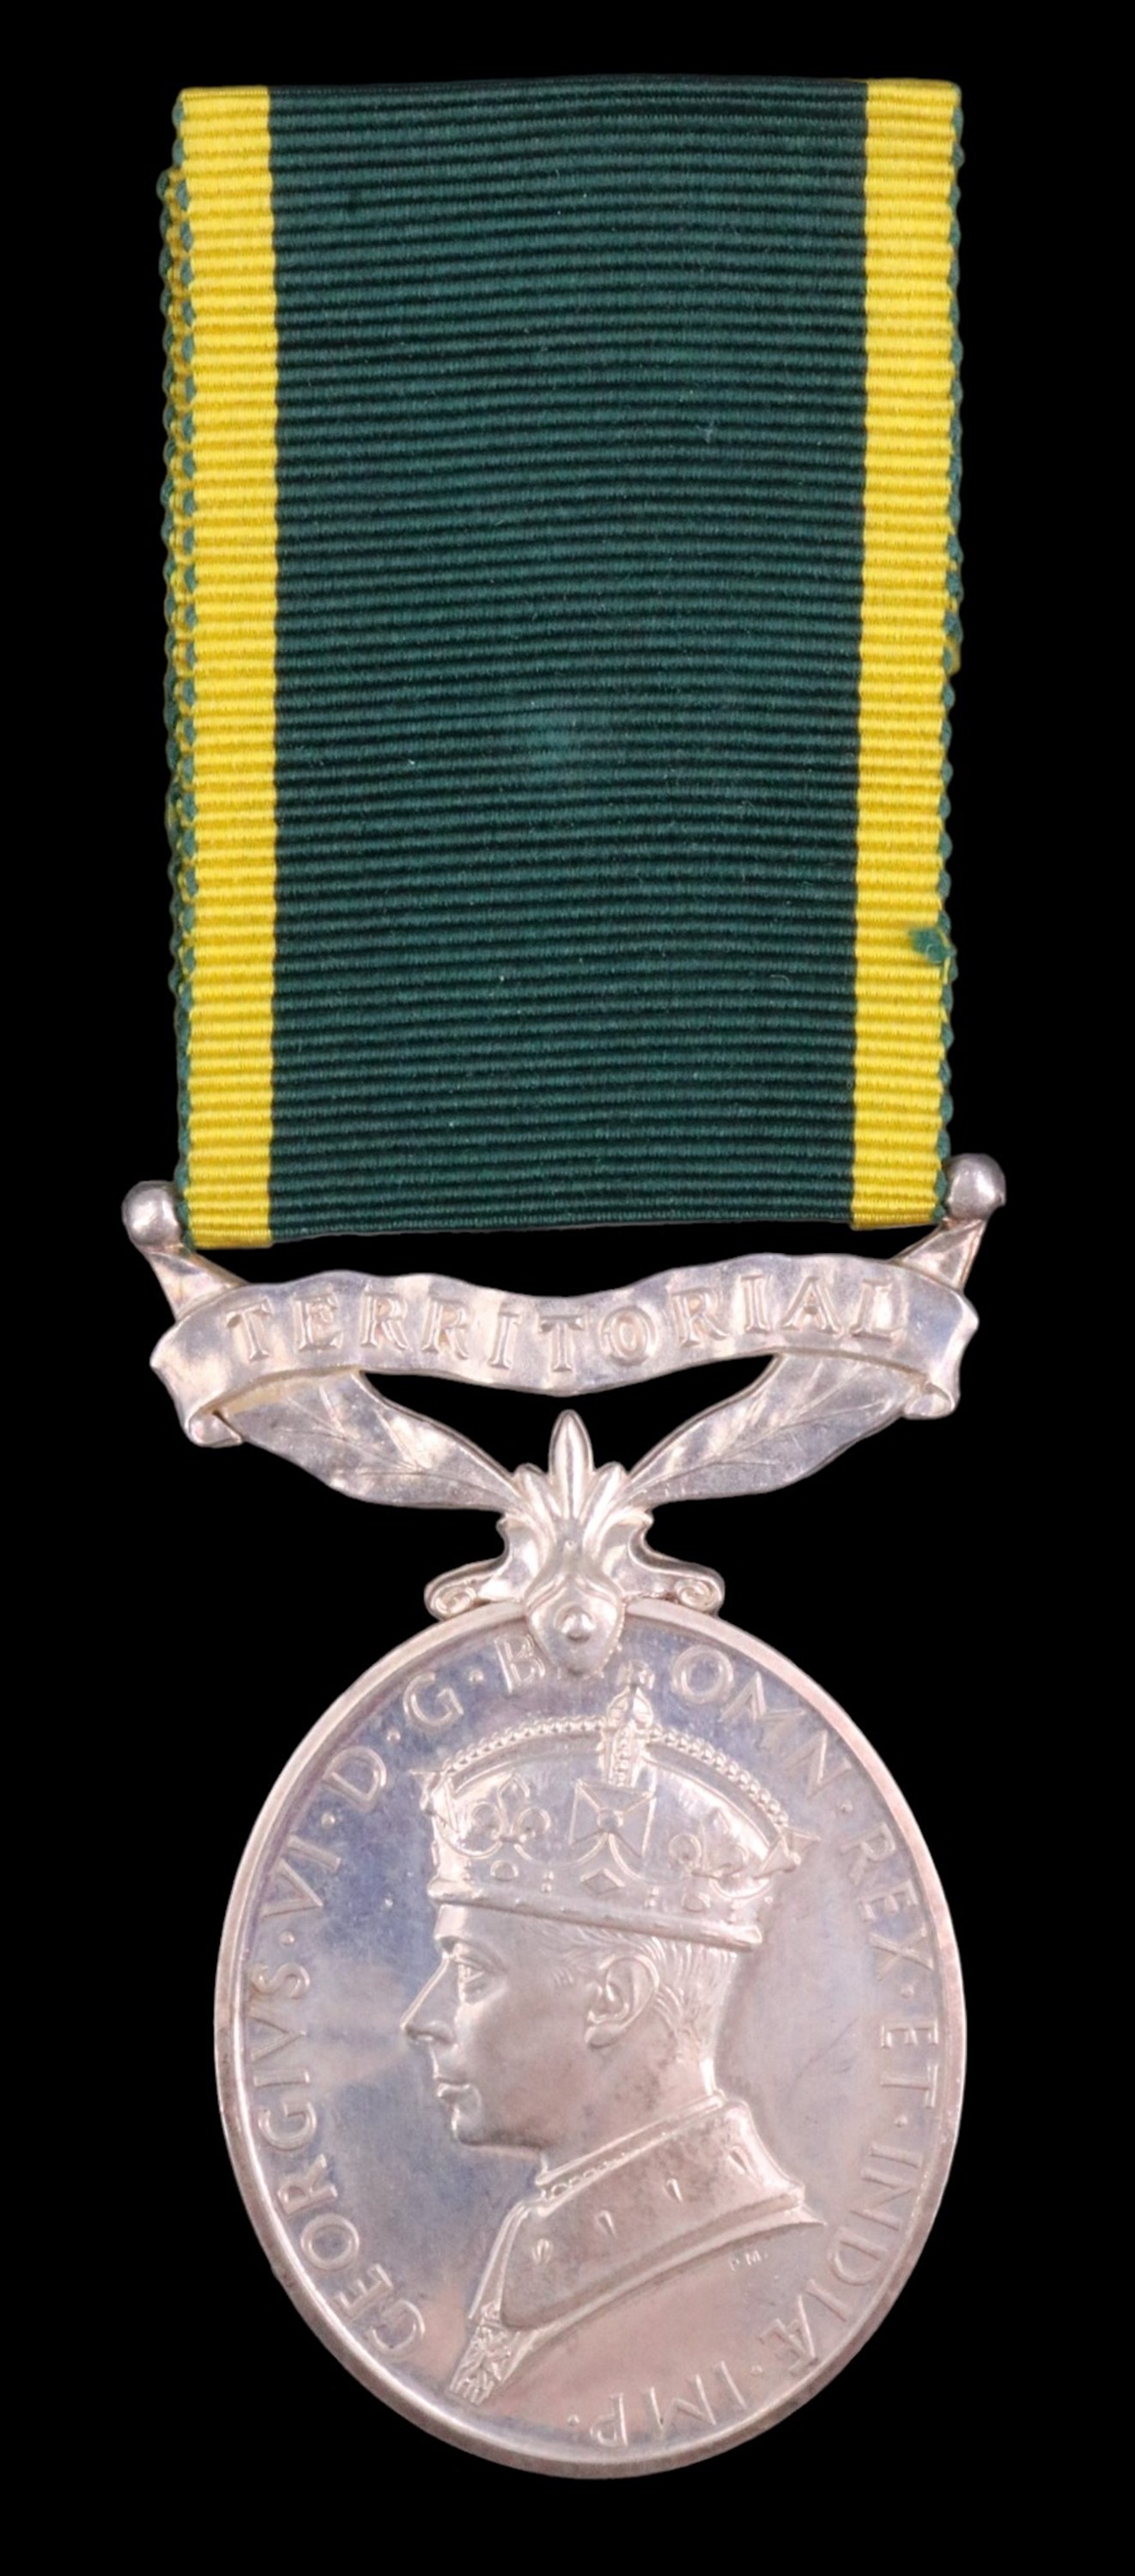 A Second World War Far East Theatre campaign medal and document group including Burma Star and - Image 9 of 17